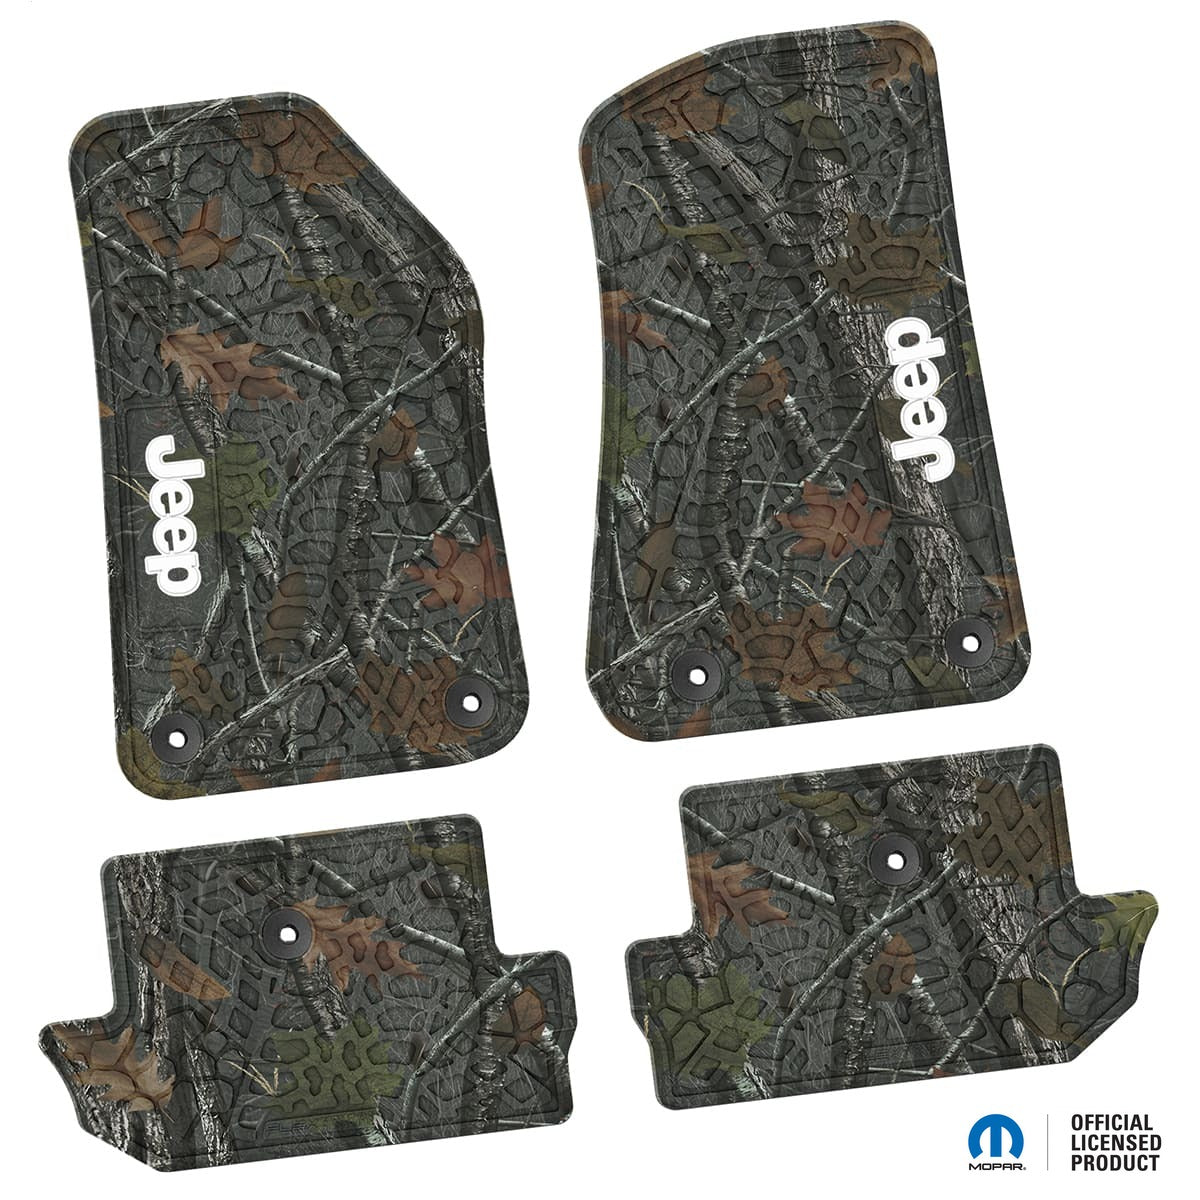 Jeep Floor Mats 18-24 Jeep Wrangler JL 2 Dr 4 Piece Tire Tread/Scorched Earth Scene w/ Jeep Insert - Rugged Woods w/ White insert FlexTread